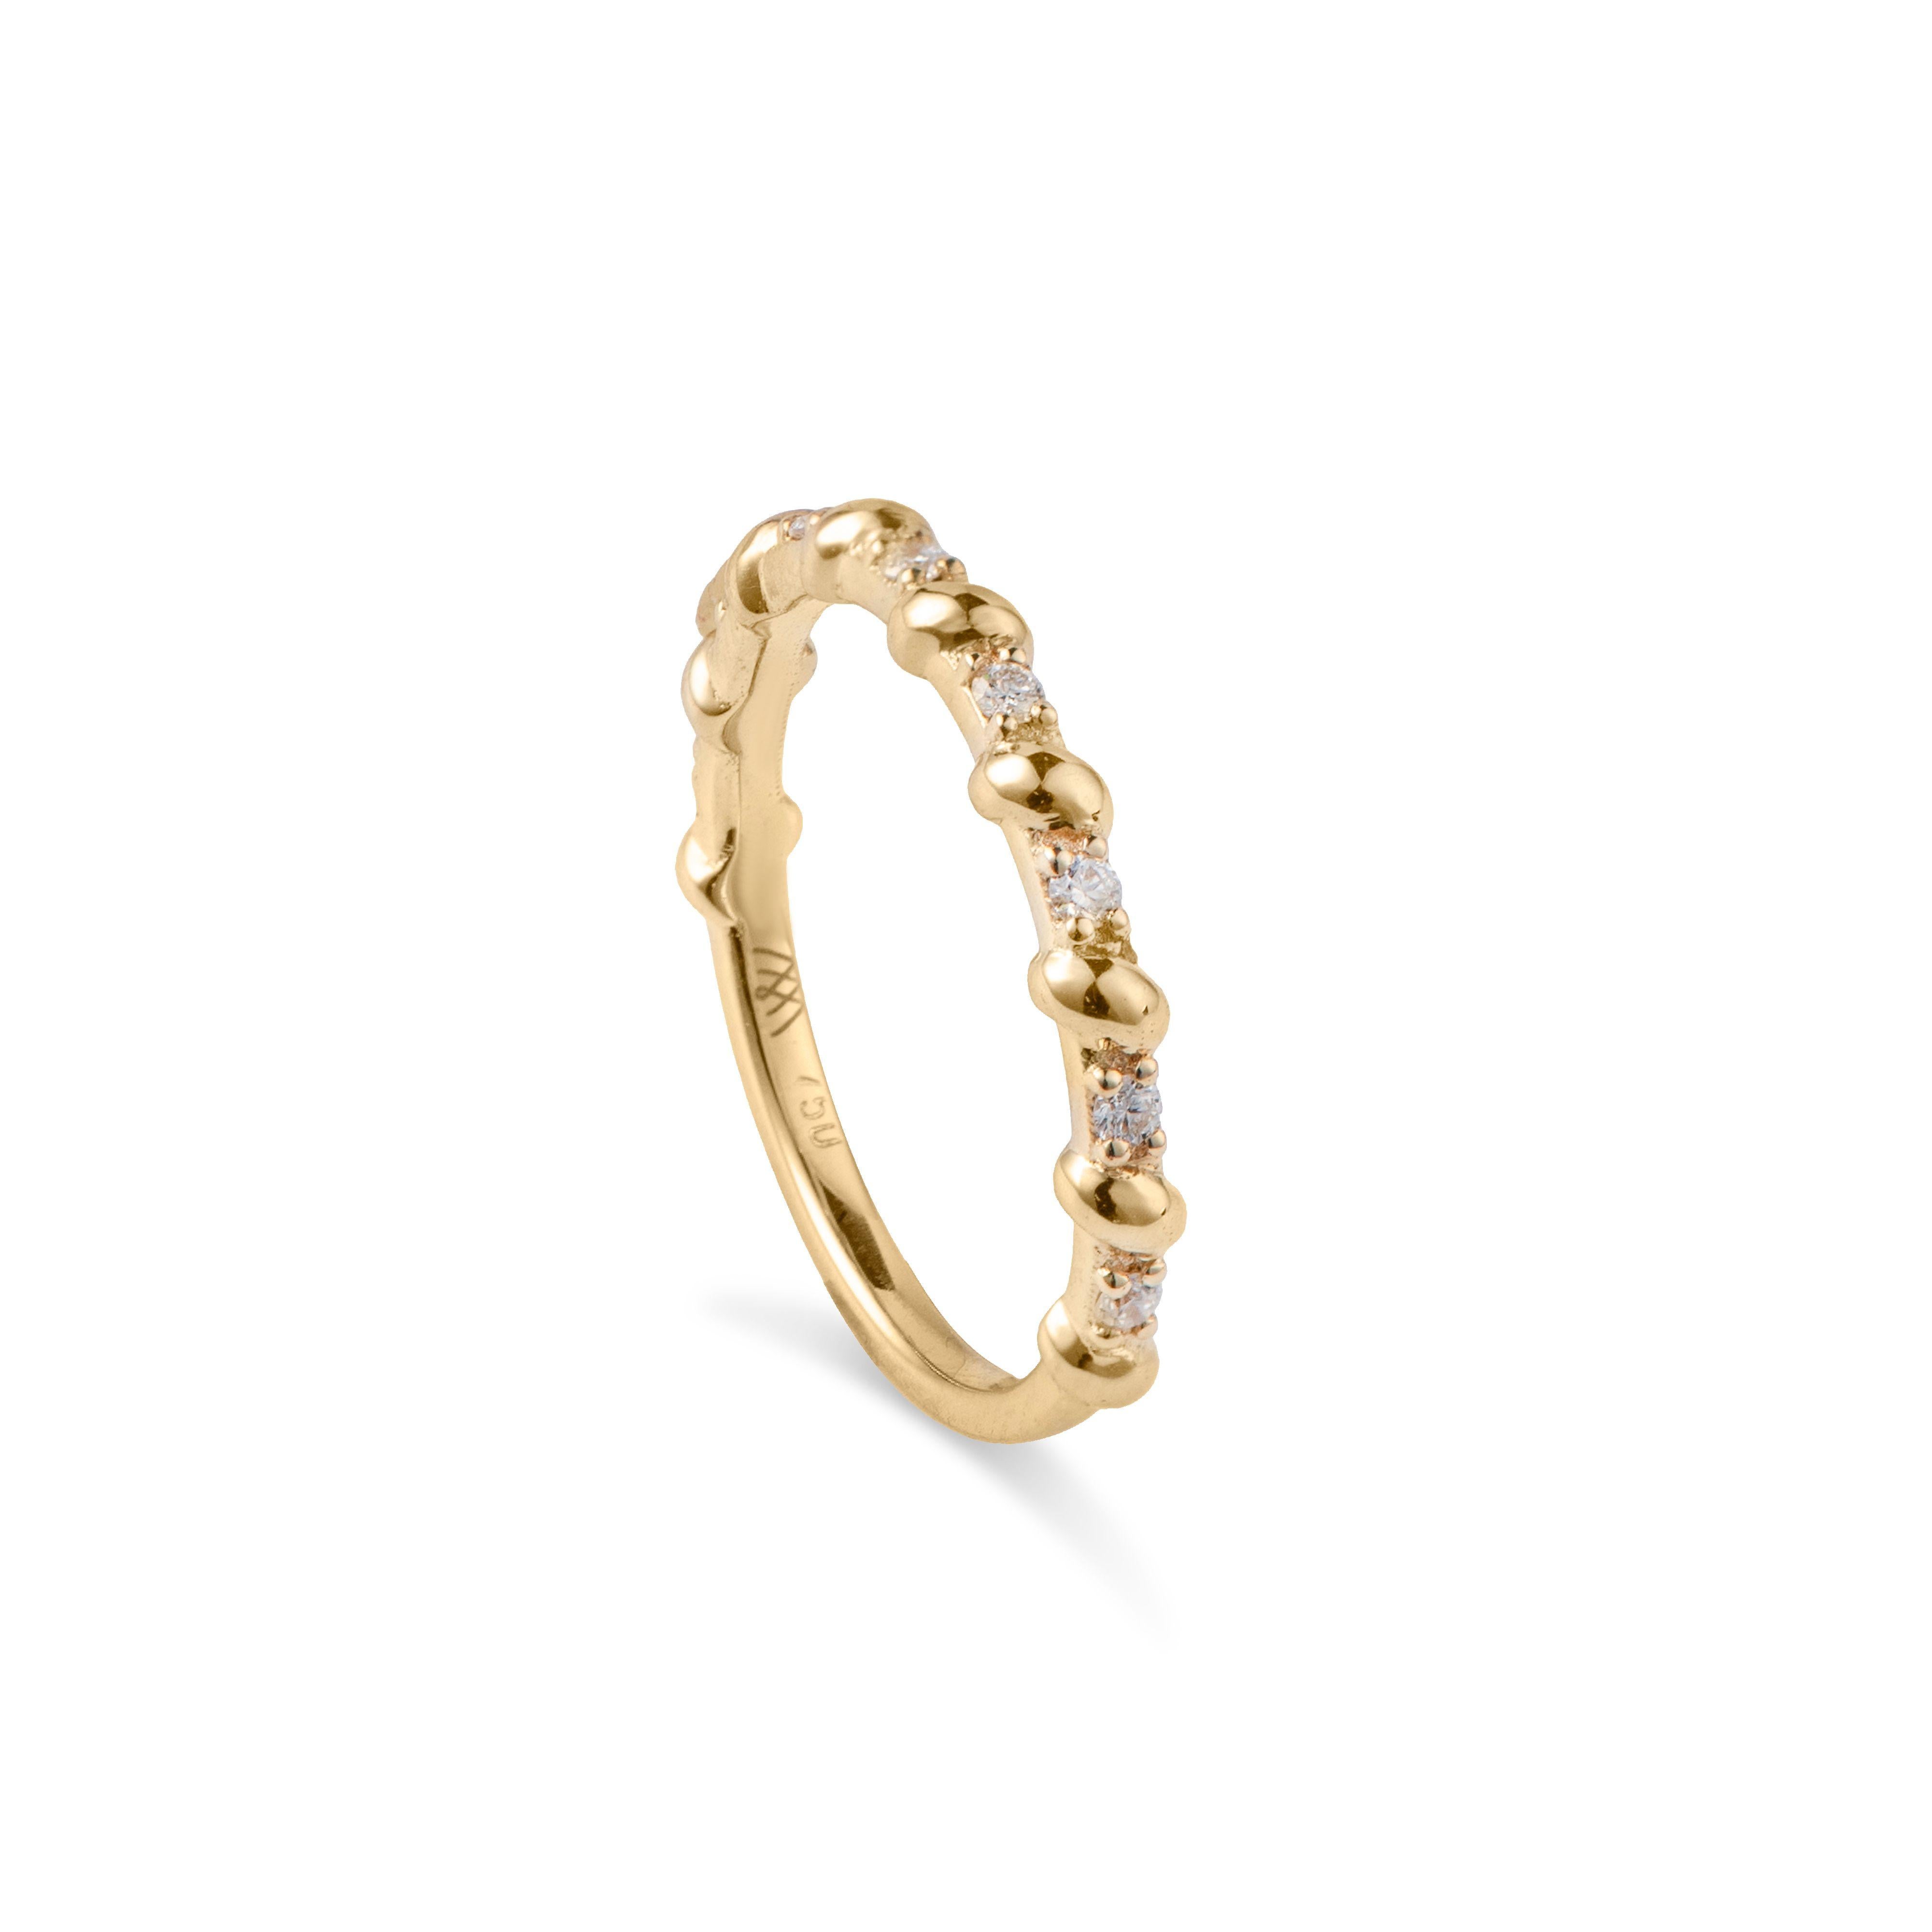 For Sale:  Diamond Ring with Rope Detail, 18K Gold, 0.13cts diamonds 2